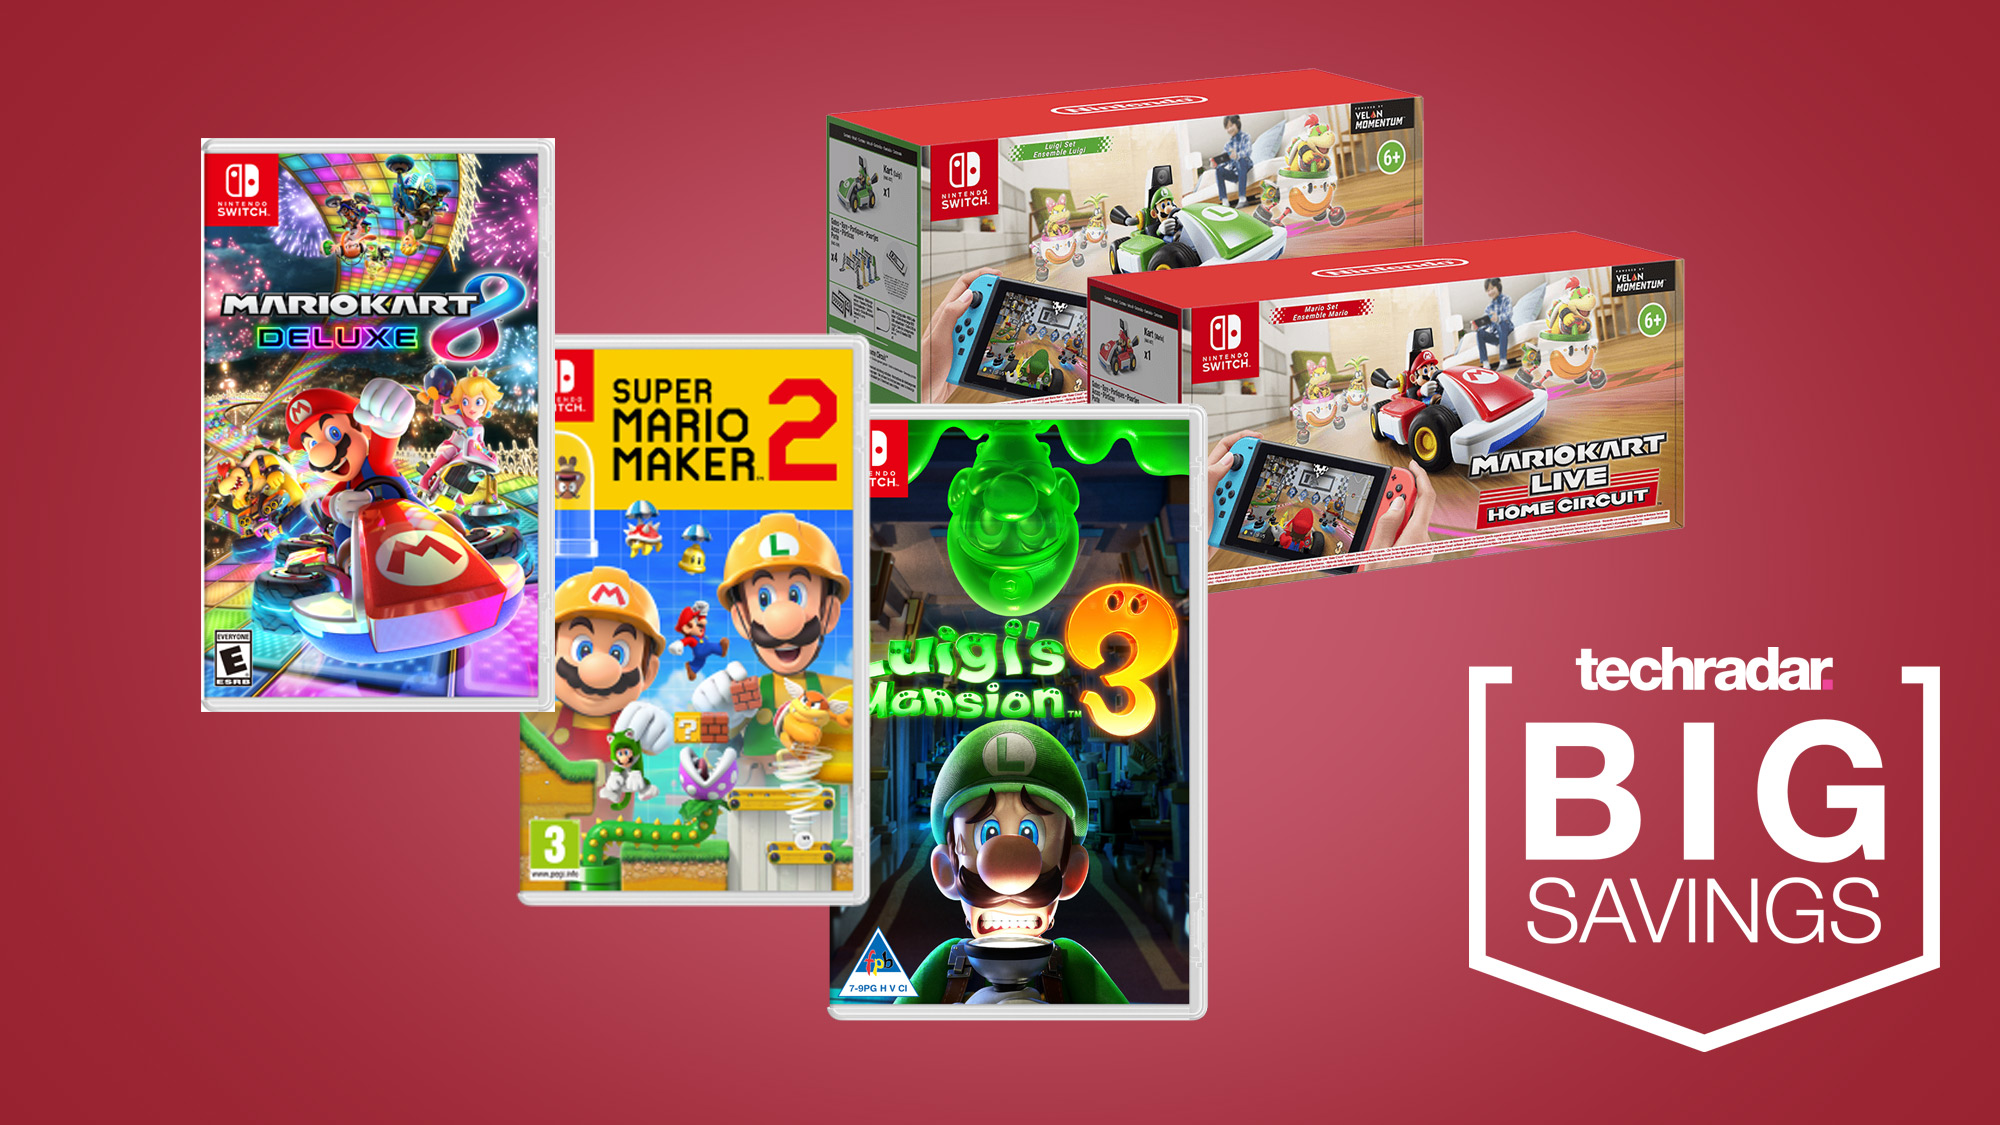 Mario Day sales are now live with huge savings on Switch games, Lego